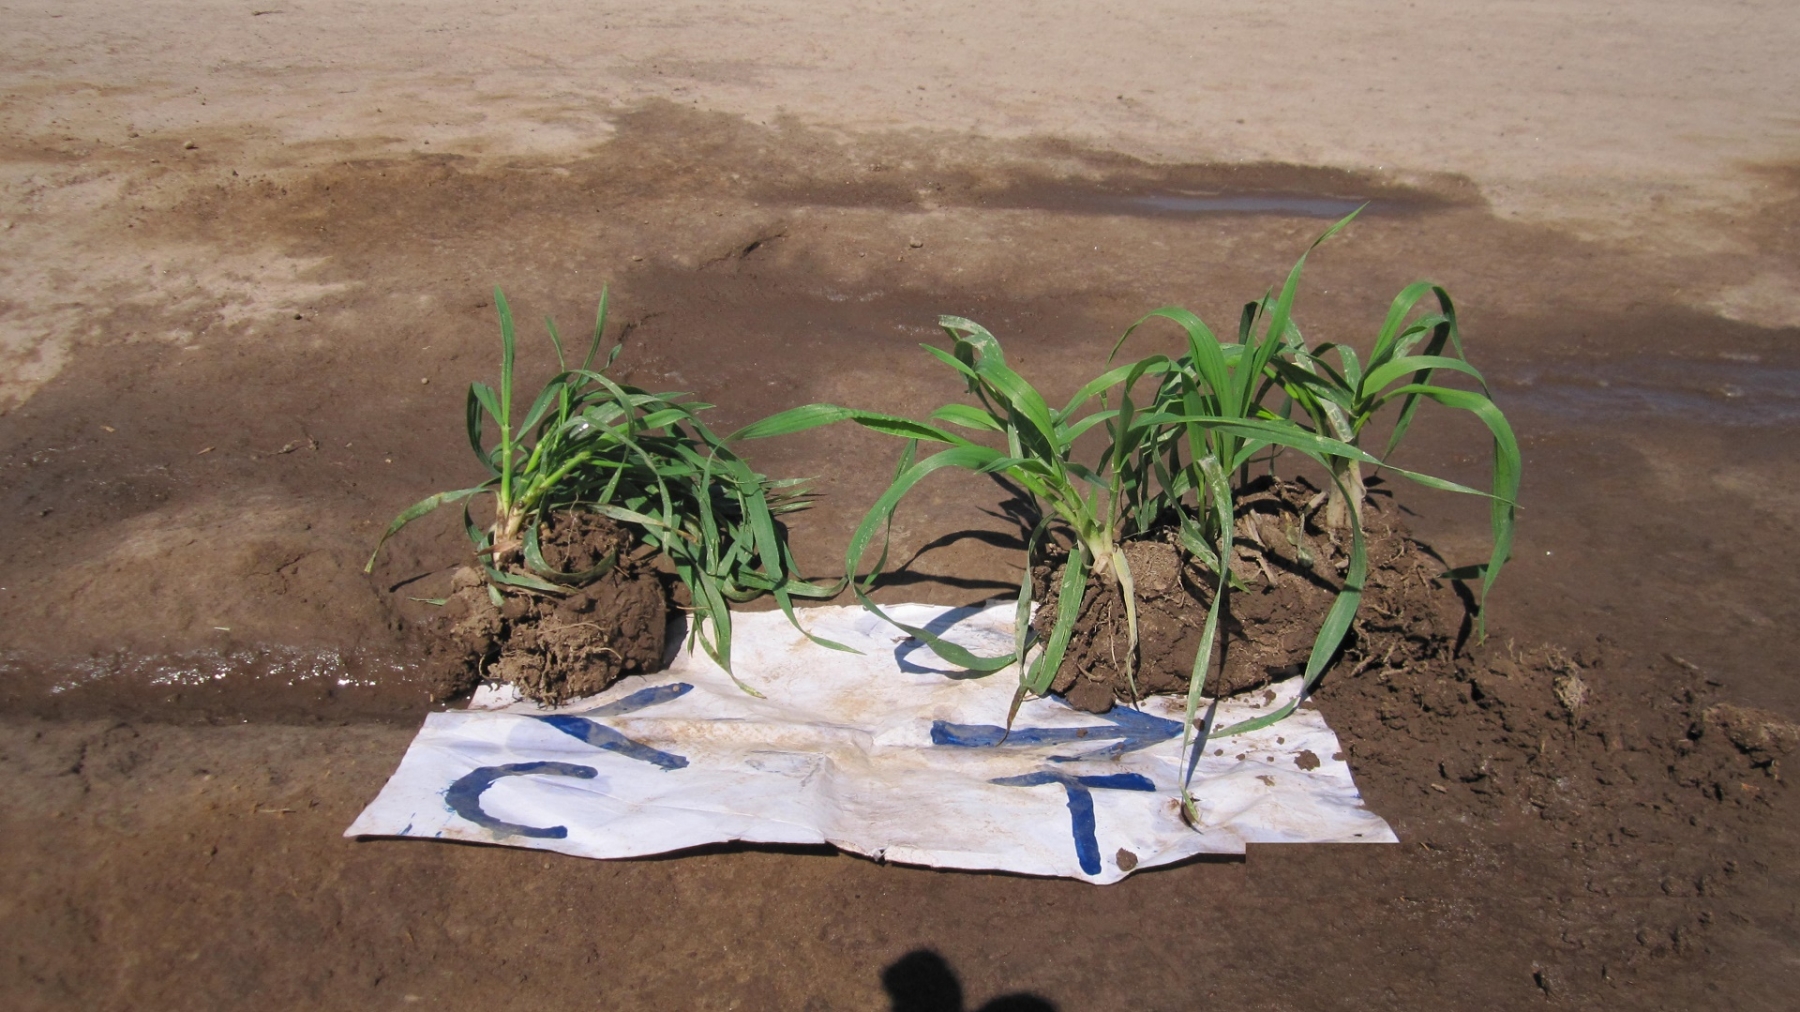 Left is control, Right is treated with absorber, earthlee, nhance and asilee. Leaves are more developed in length and breadth.